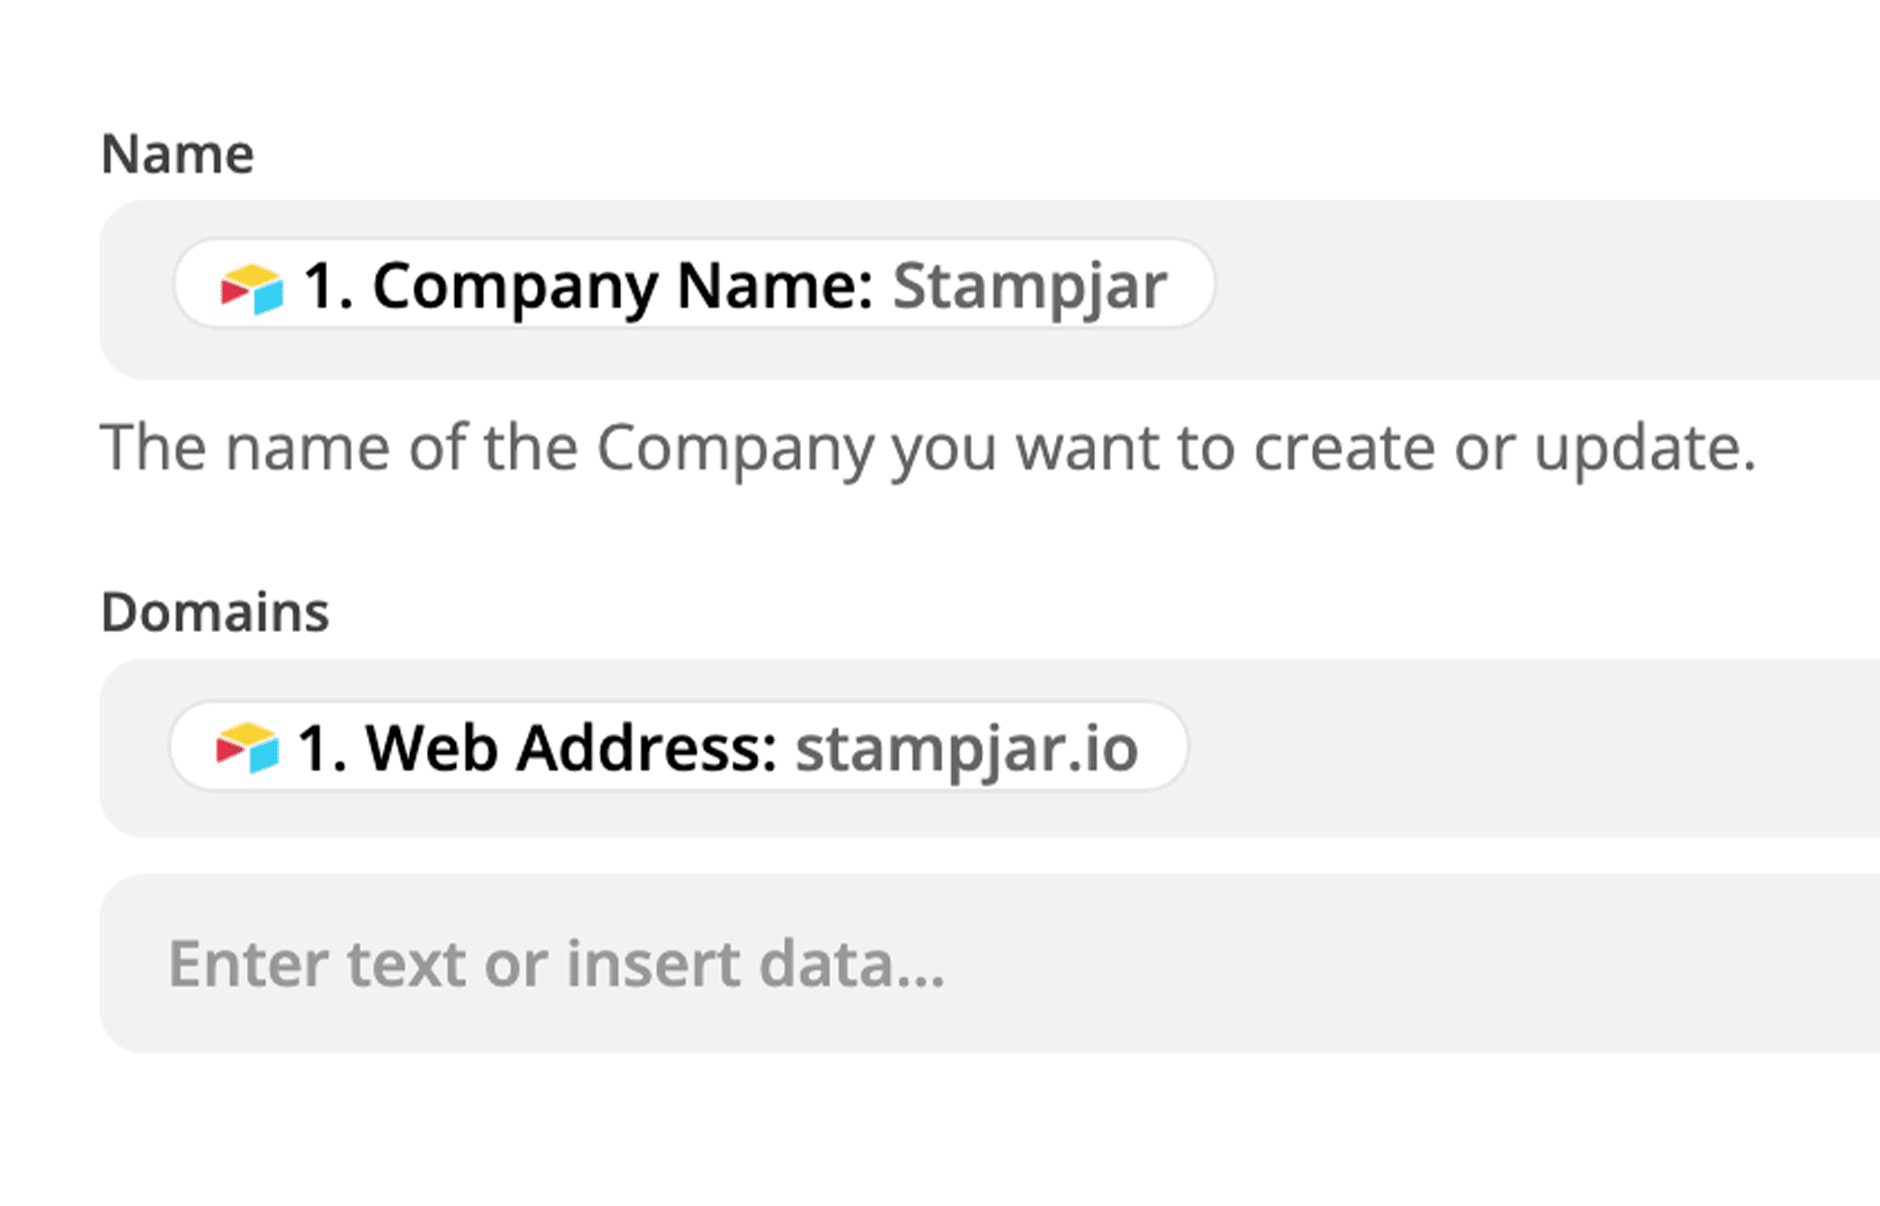 Another action step in Zapier, this time creating a new company record. The example company name is given, along with its web address.